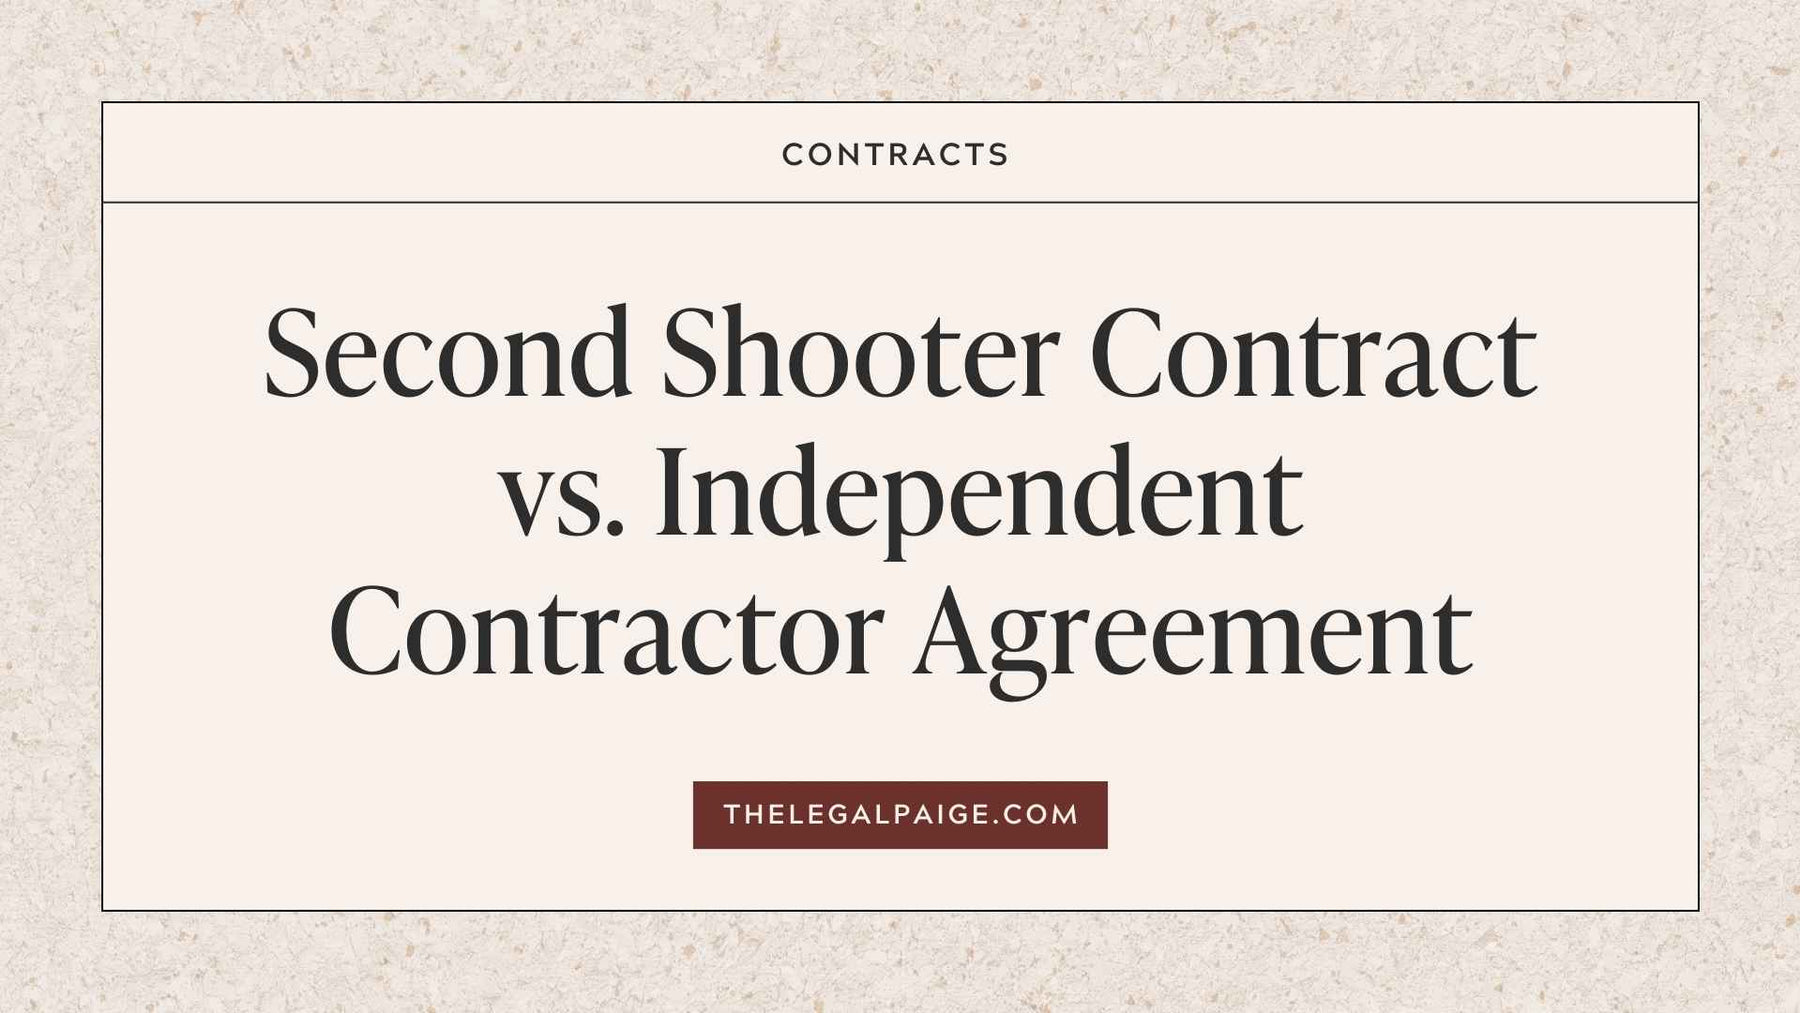 The Legal Paige Blog - ﻿Second Shooter Contract vs. Independent Contractor Agreement ﻿﻿